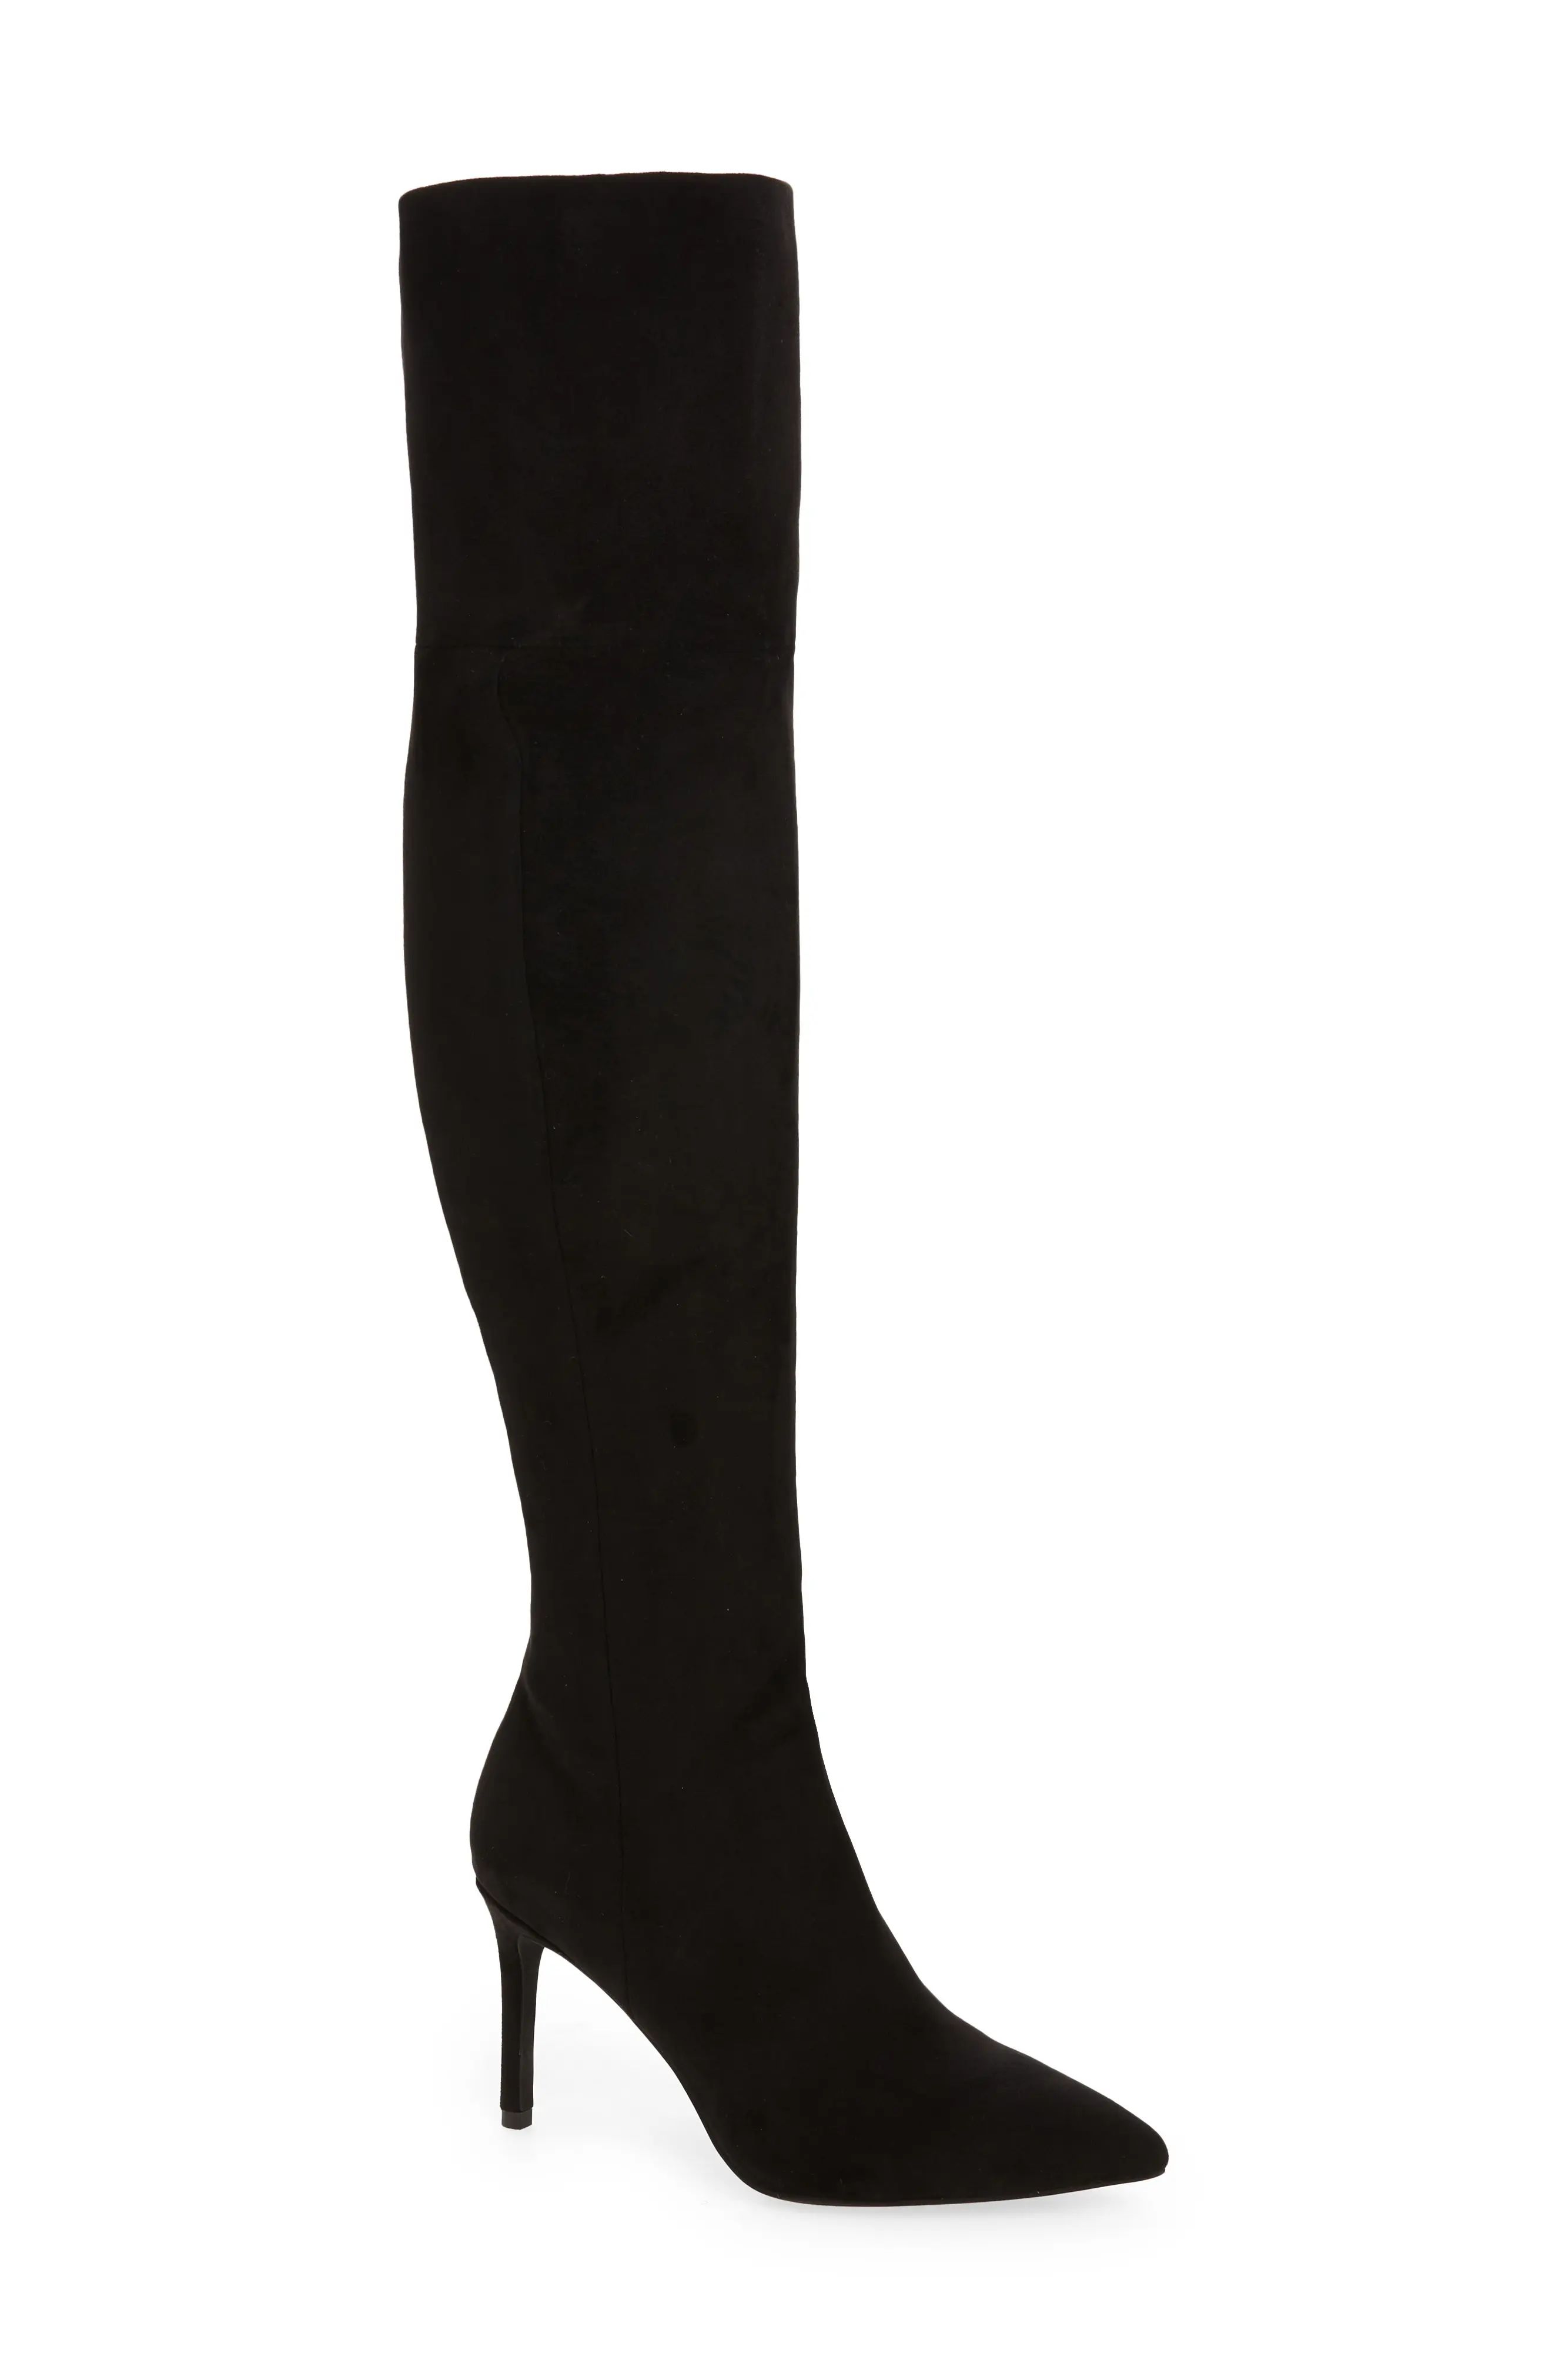 Jeffrey Campbell Pillar Over the Knee Boot, Size 6.5 in Black Stretch Suede at Nordstrom | Nordstrom